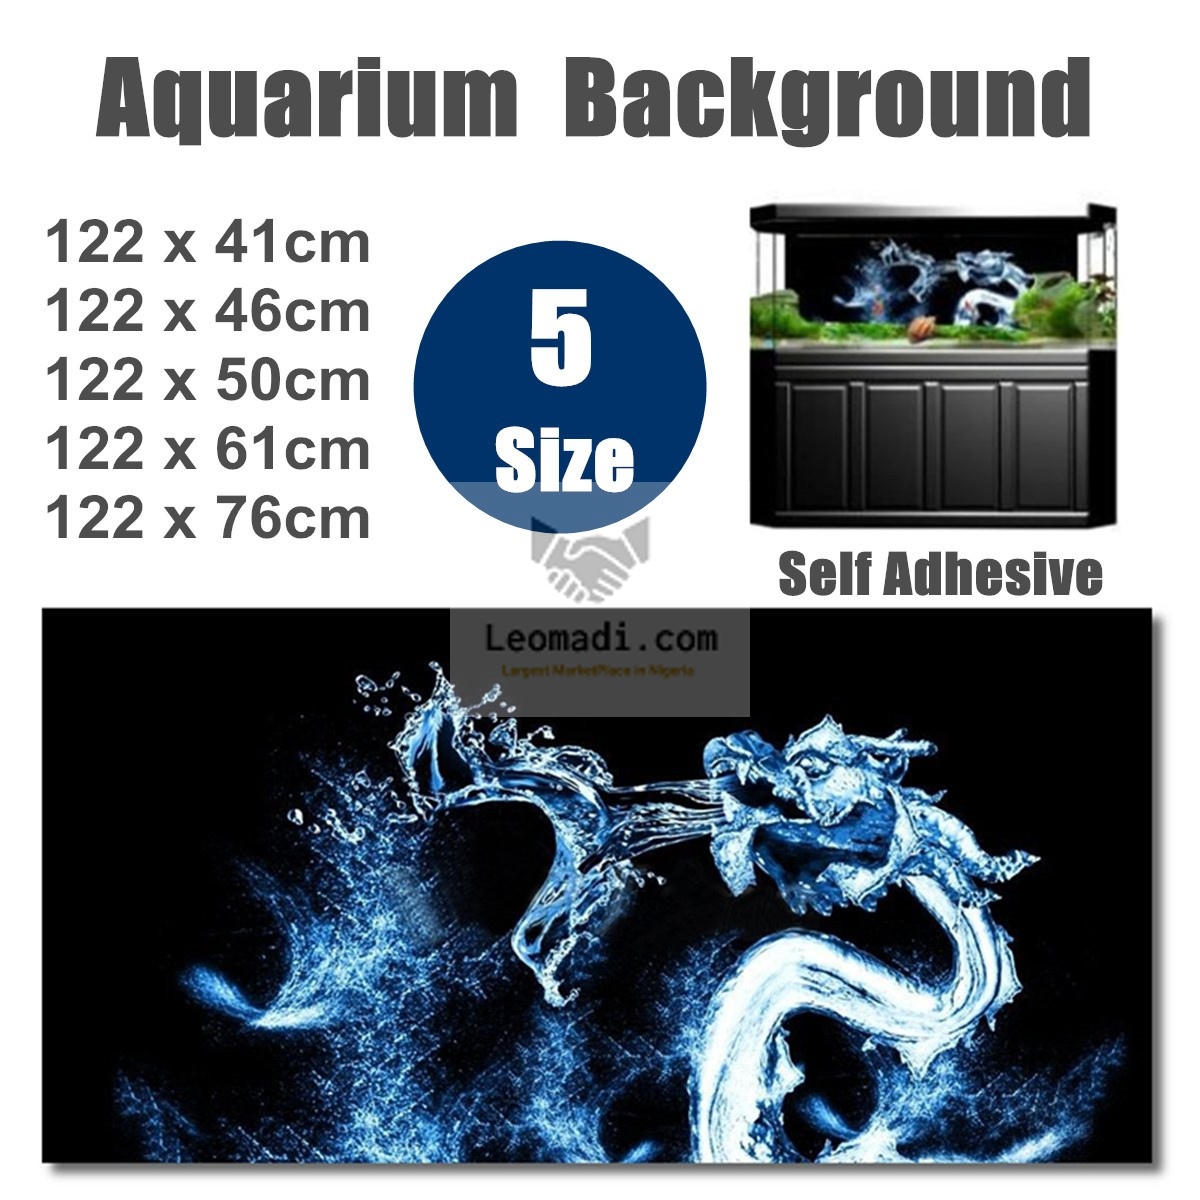 Shipped from abroad HD Water Dragon Background Poster Fish Tank Aquarium